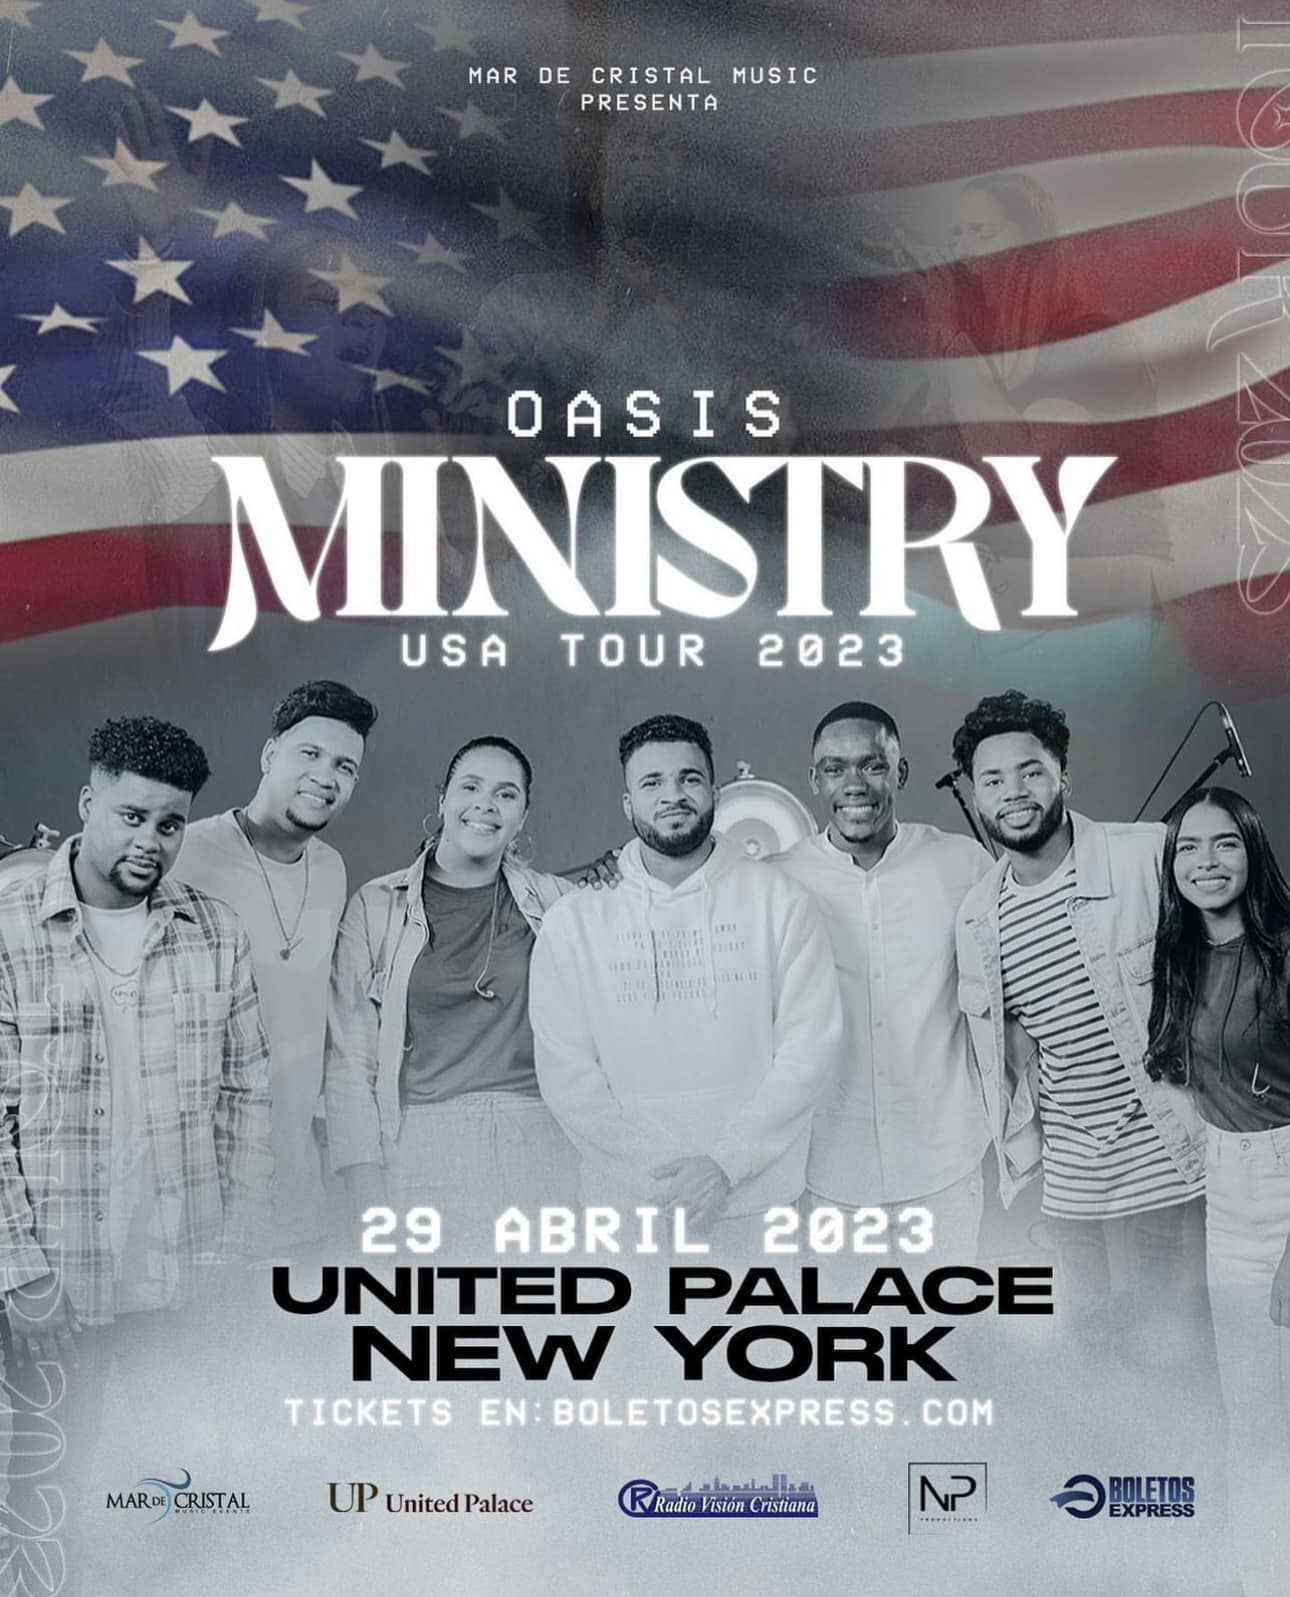 oasis ministry tour dates